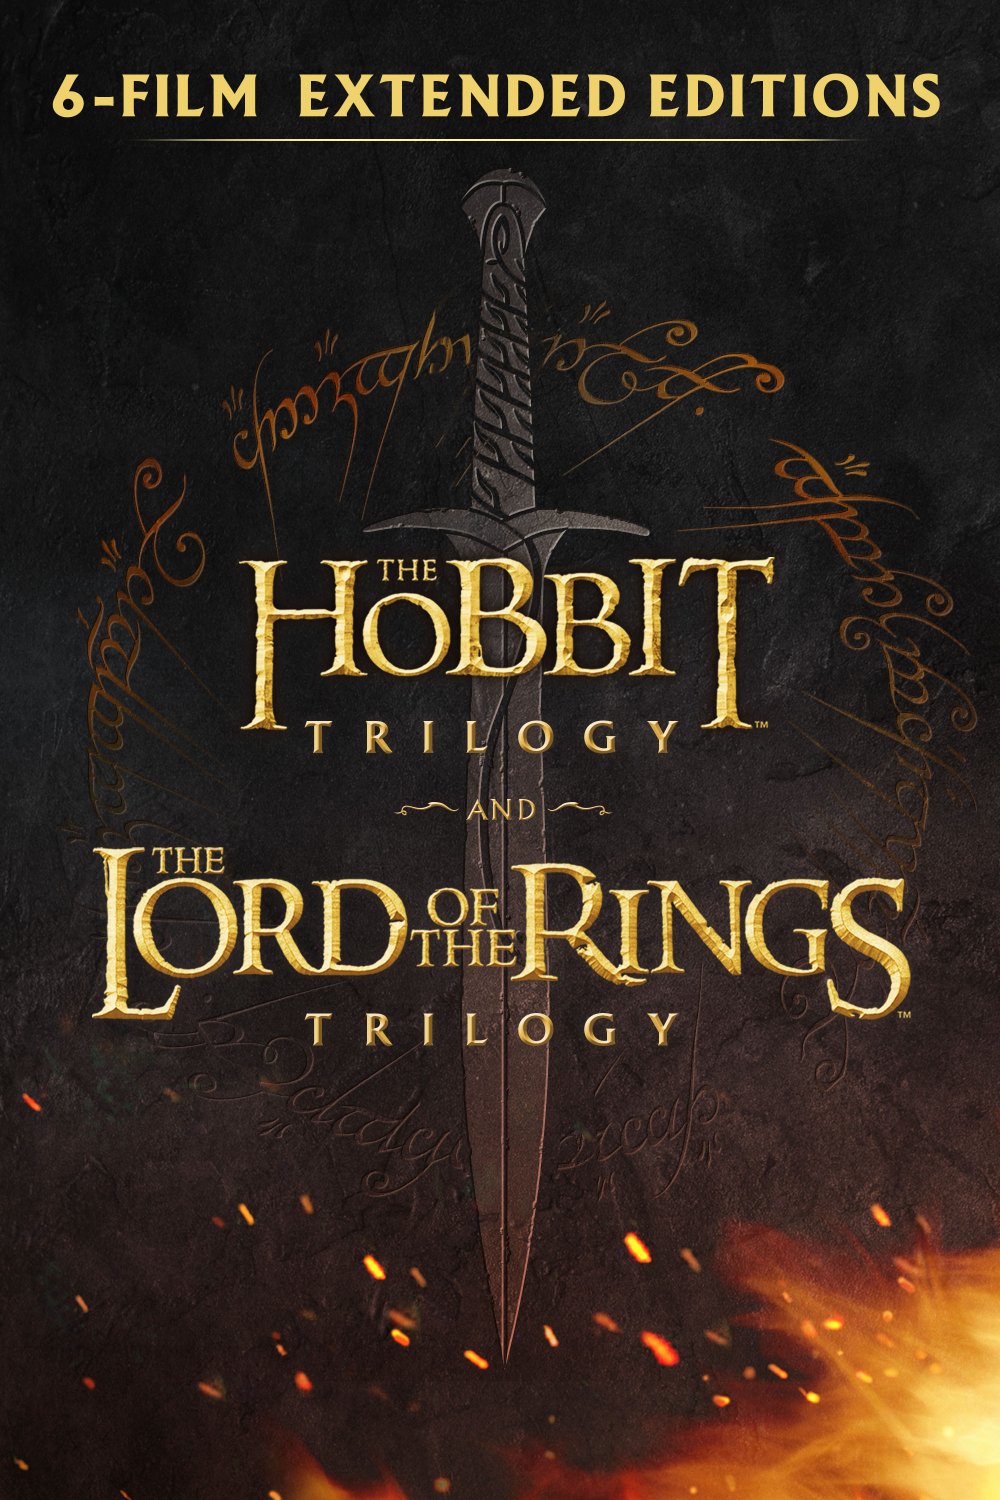 offset zonsopkomst salami The Hobbit: Motion Picture Trilogy now available On Demand!